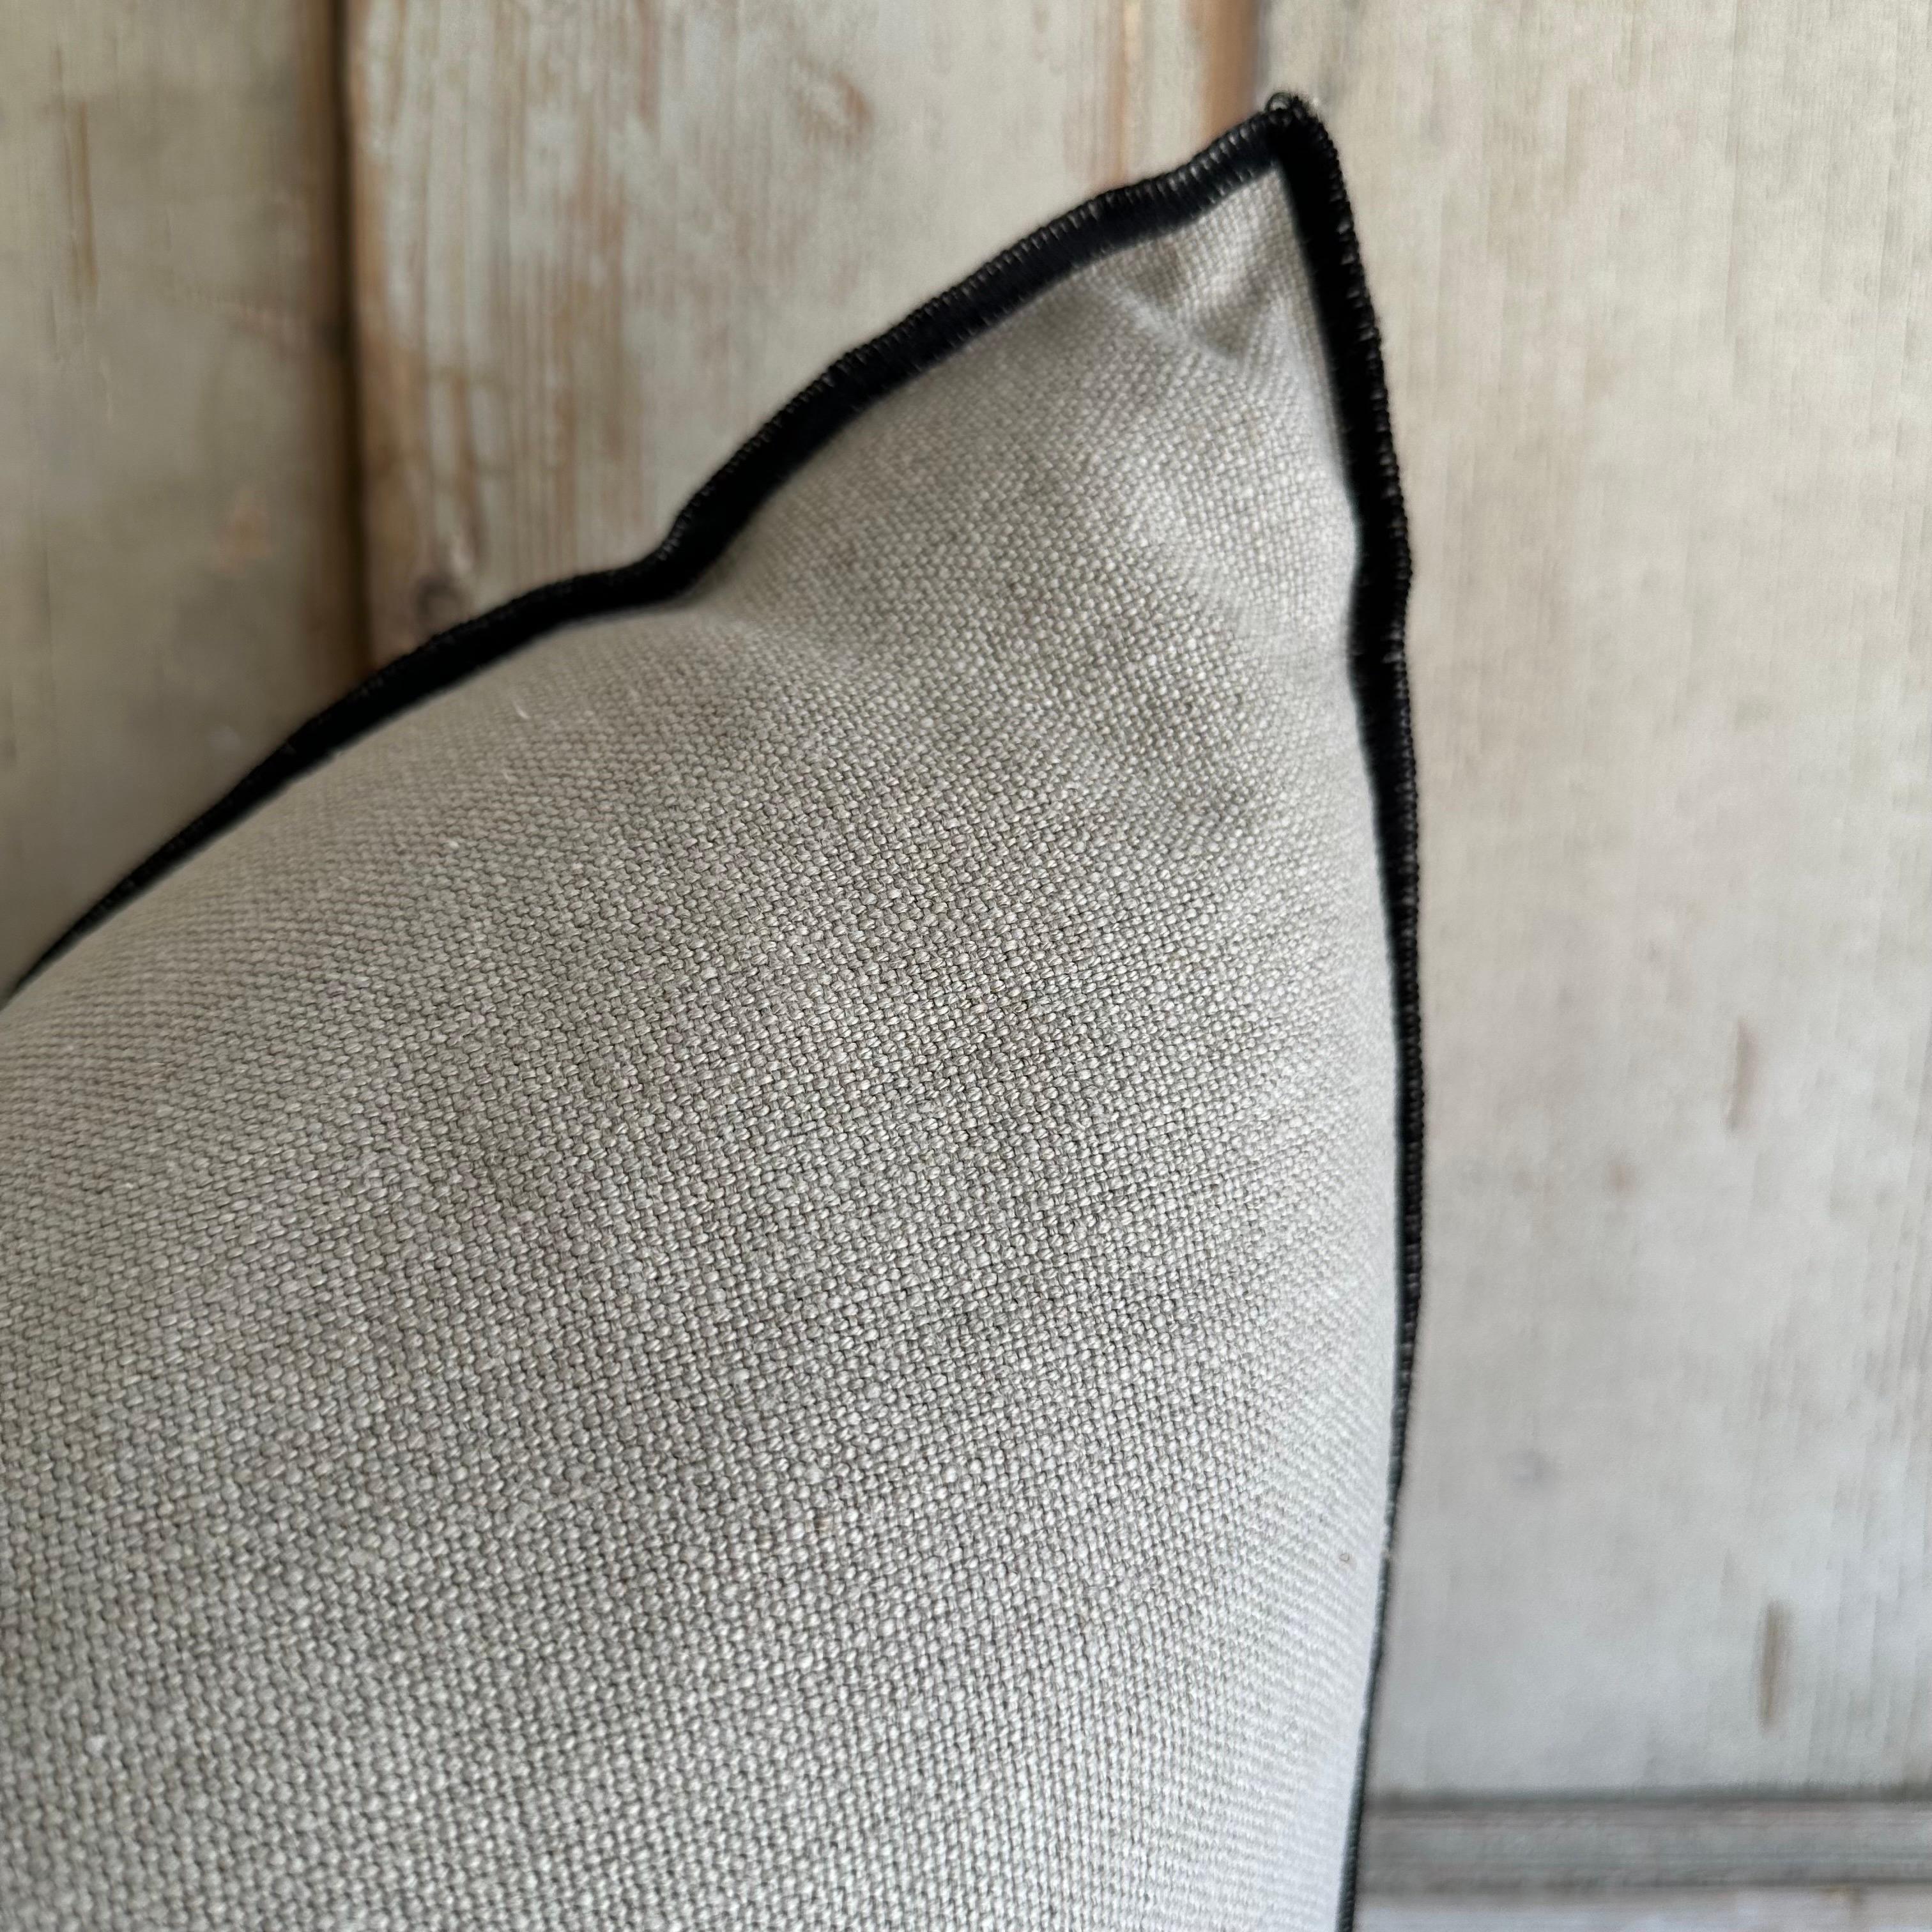 French stone washed linen accent pillow with down feather insert.

Color: natural linen; textured style pillow with a stitched edge, metal zipper closure. 
Size: 22